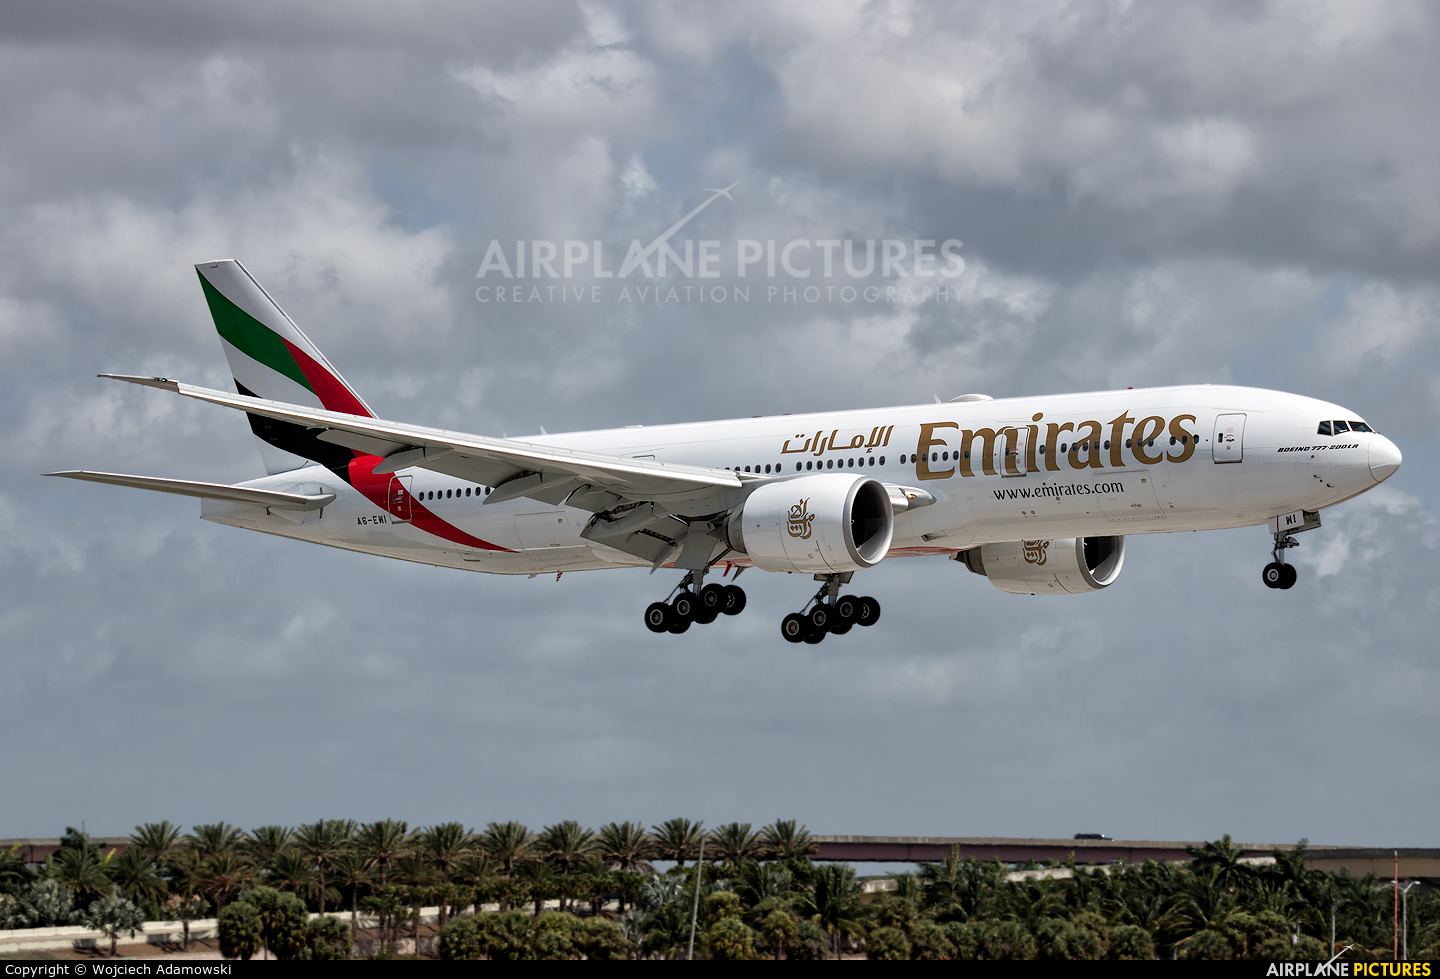 Emirates Airlines A6-EWI aircraft at Fort Lauderdale - Hollywood Intl